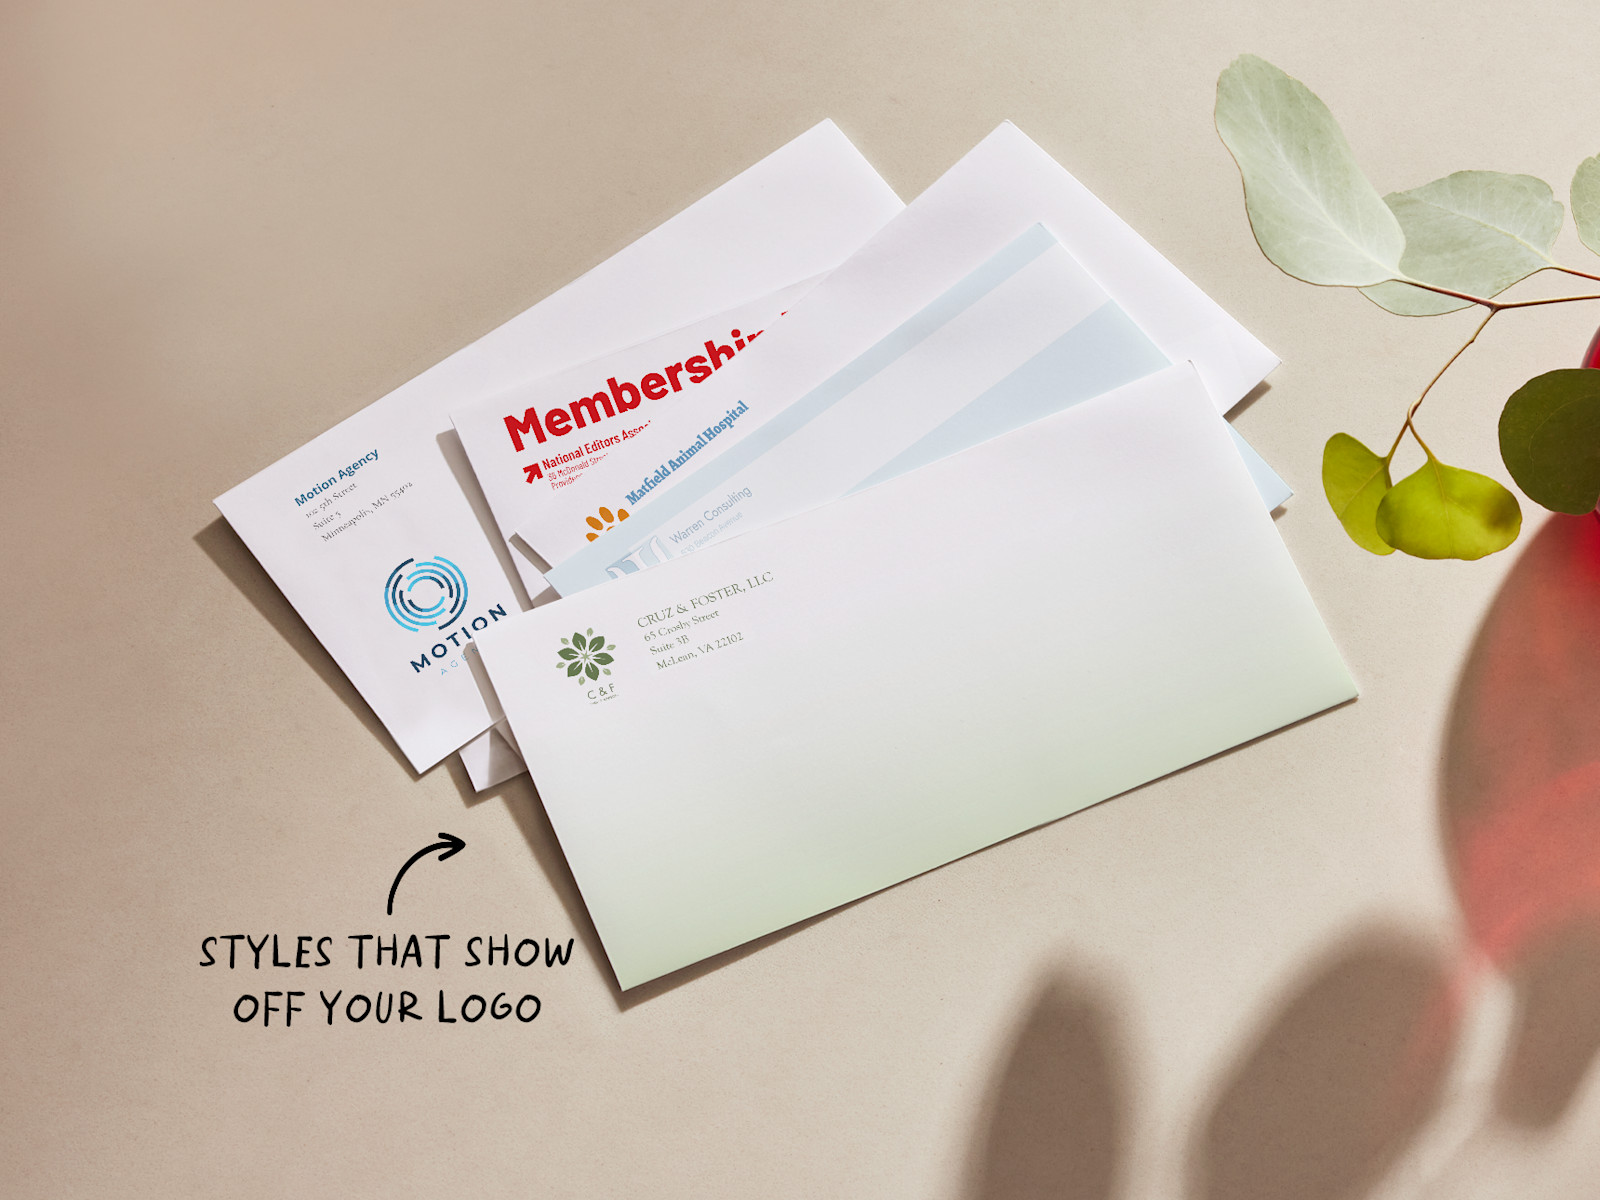 DL Custom envelopes showing different business designs. There is a text that says envelopes have different styles that show off your logo